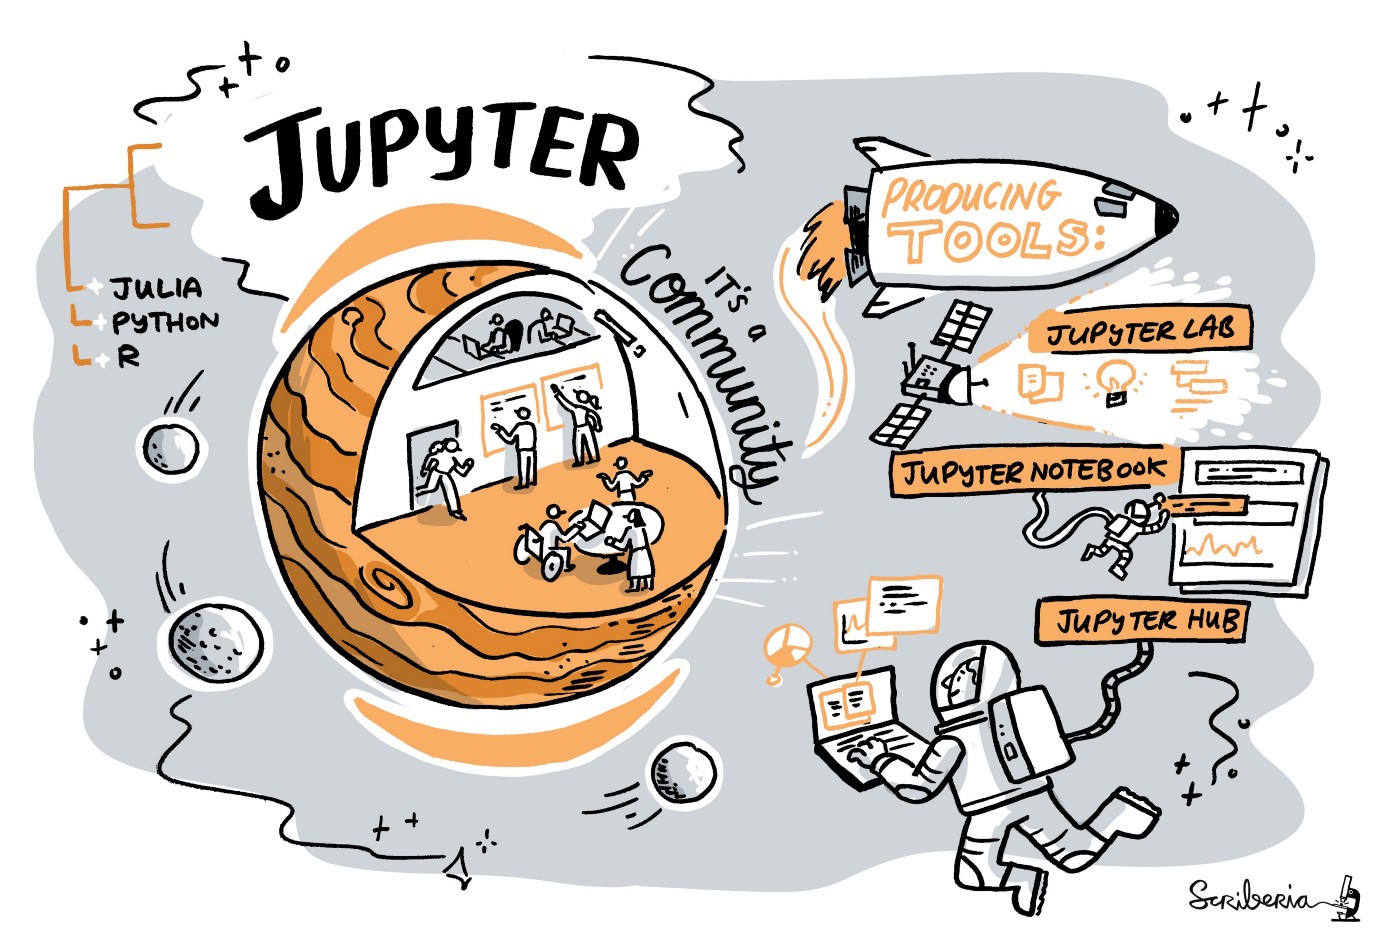 This image was created by Scriberia for The Turing Way community and is used under a CC-BY licence